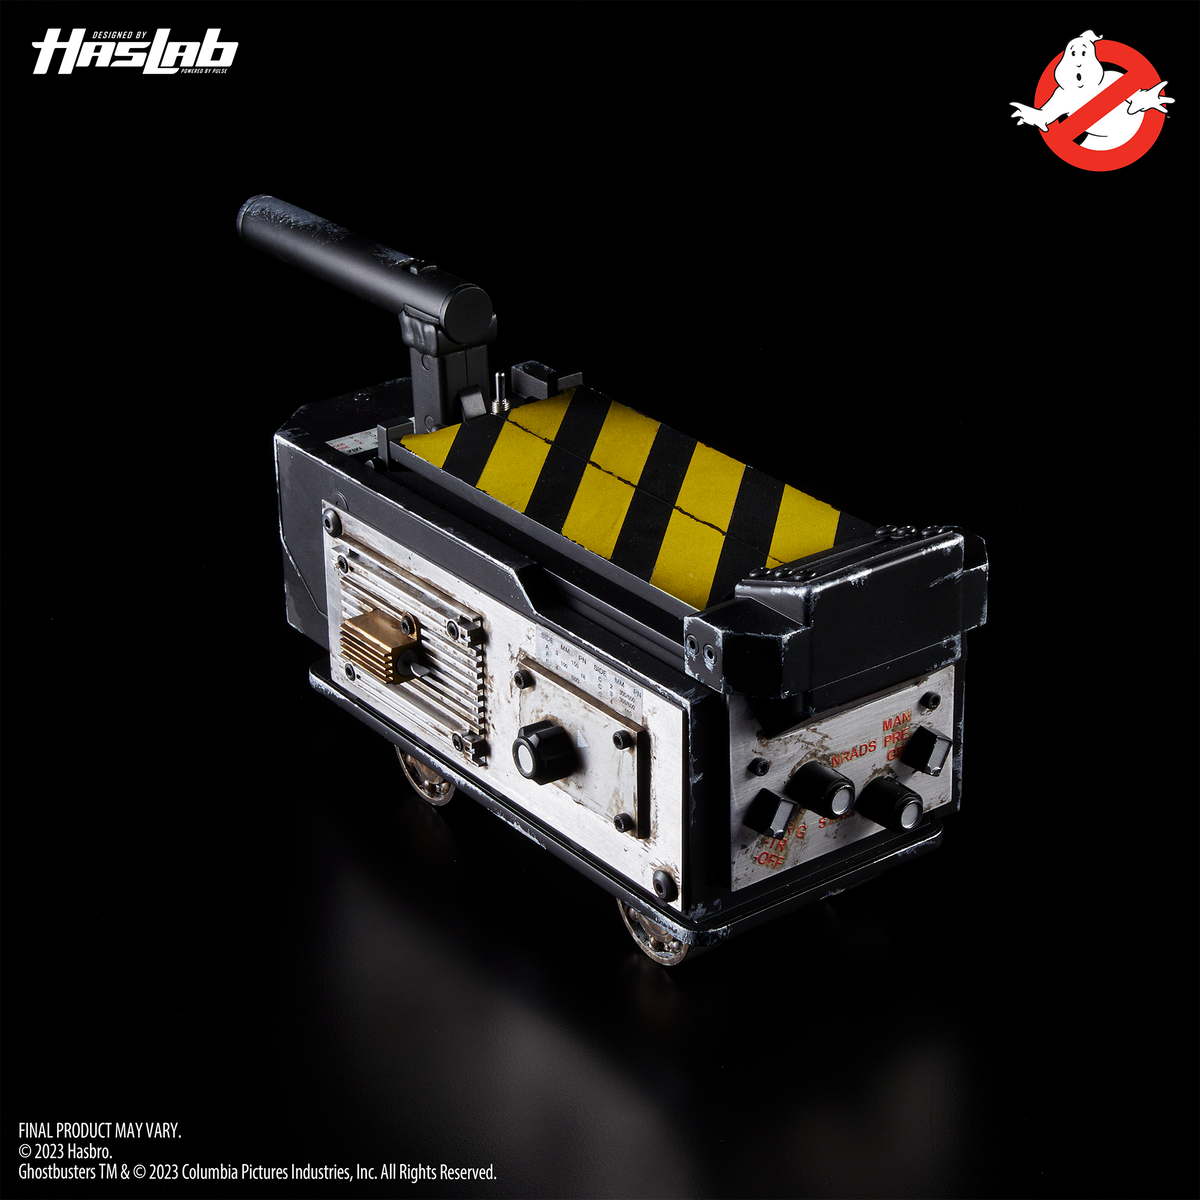 Ghostbusters Plasma Series HasLab Two in the Box! Ghost Trap and P.K.E.  Meter